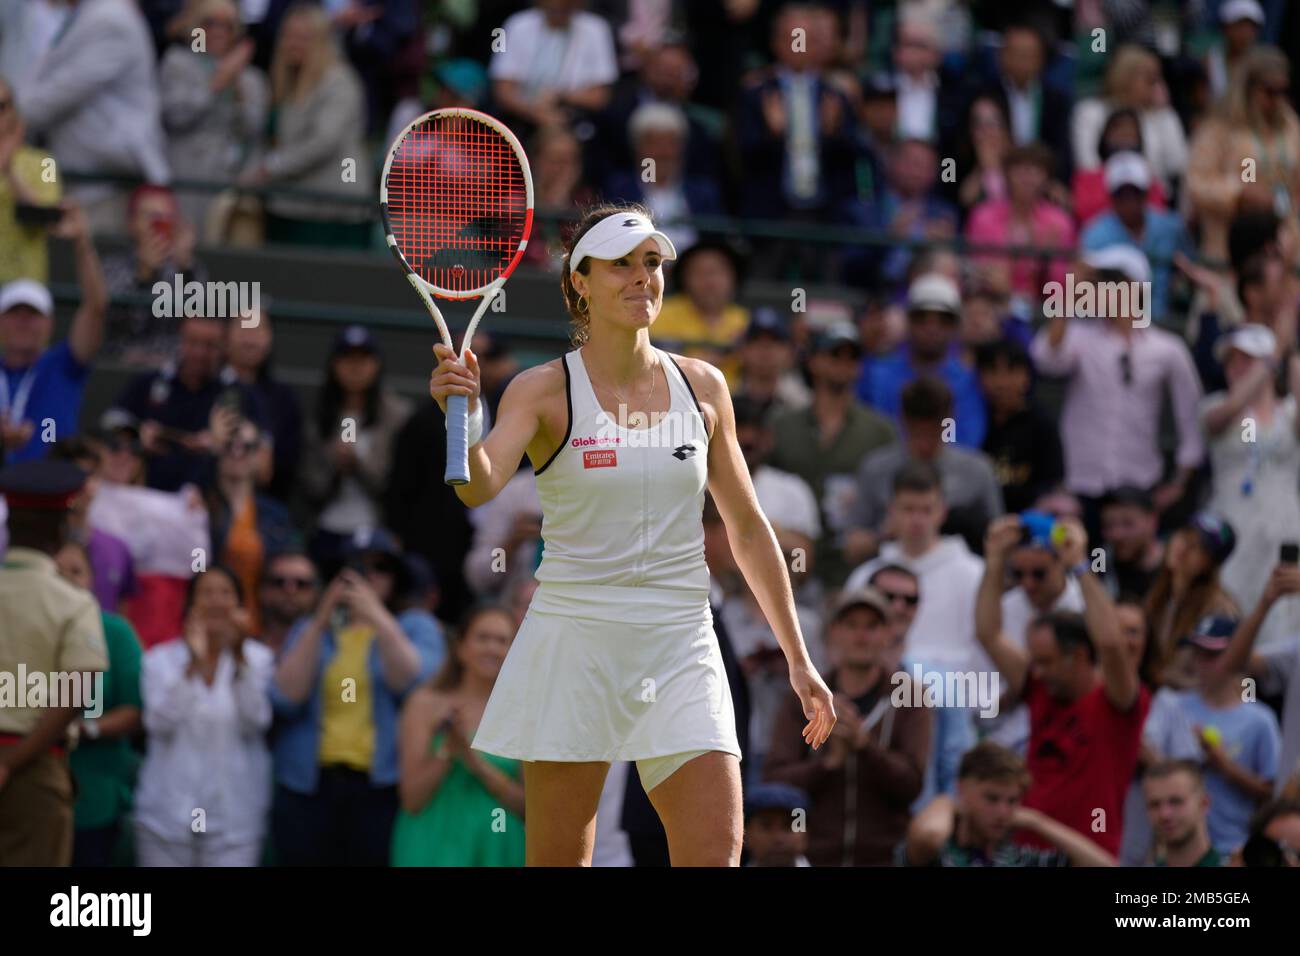 Alize Cornet of France celebrates beating Serena Williams of the